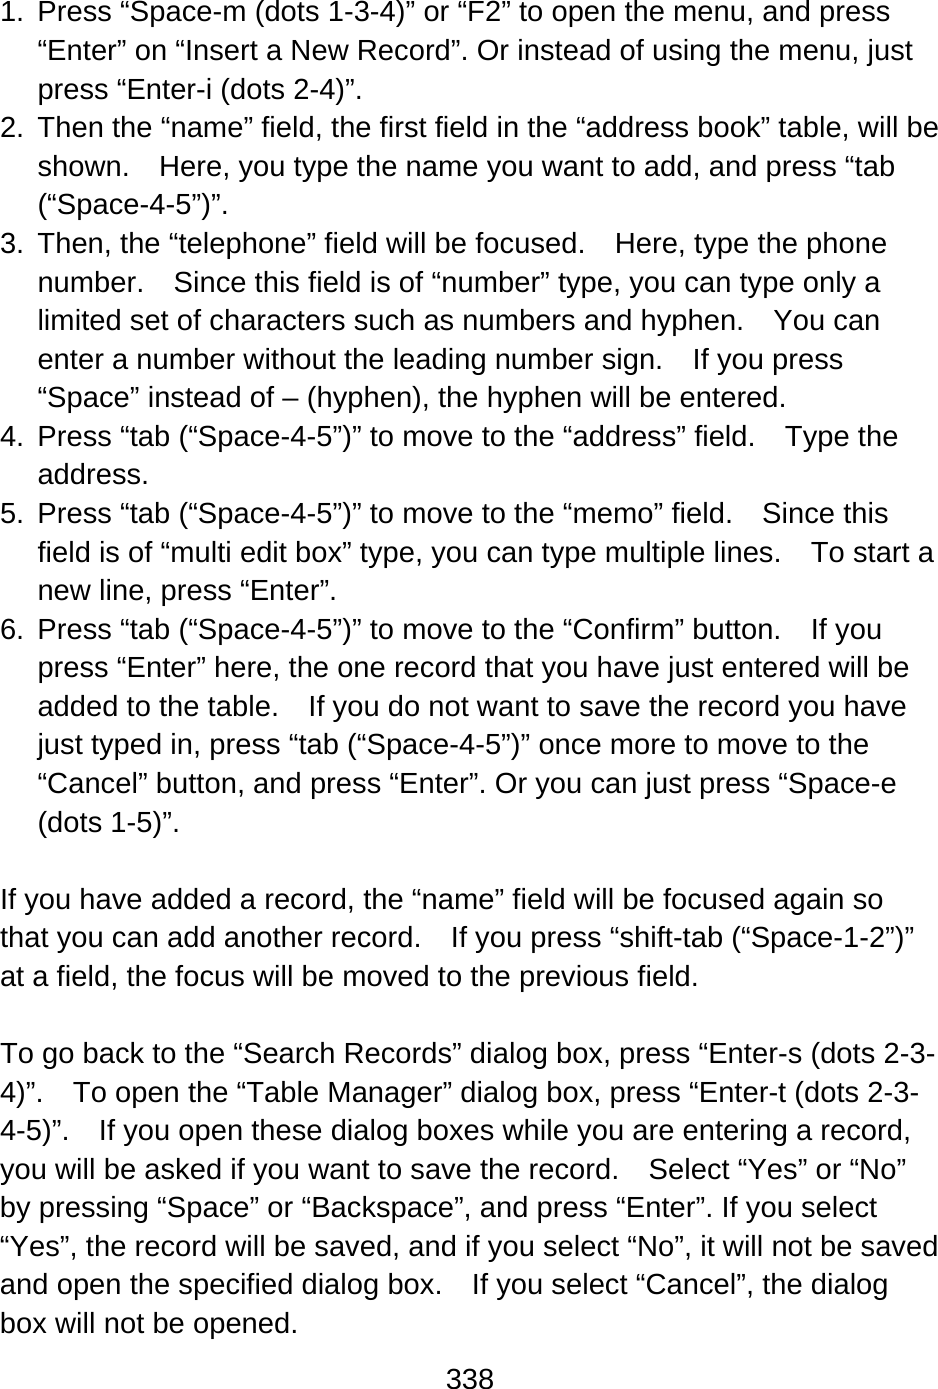 338   1.  Press “Space-m (dots 1-3-4)” or “F2” to open the menu, and press “Enter” on “Insert a New Record”. Or instead of using the menu, just press “Enter-i (dots 2-4)”. 2.  Then the “name” field, the first field in the “address book” table, will be shown.    Here, you type the name you want to add, and press “tab (“Space-4-5”)”. 3.  Then, the “telephone” field will be focused.    Here, type the phone number.    Since this field is of “number” type, you can type only a limited set of characters such as numbers and hyphen.    You can enter a number without the leading number sign.    If you press “Space” instead of – (hyphen), the hyphen will be entered. 4.  Press “tab (“Space-4-5”)” to move to the “address” field.    Type the address. 5.  Press “tab (“Space-4-5”)” to move to the “memo” field.    Since this field is of “multi edit box” type, you can type multiple lines.    To start a new line, press “Enter”. 6.  Press “tab (“Space-4-5”)” to move to the “Confirm” button.    If you press “Enter” here, the one record that you have just entered will be added to the table.    If you do not want to save the record you have just typed in, press “tab (“Space-4-5”)” once more to move to the “Cancel” button, and press “Enter”. Or you can just press “Space-e (dots 1-5)”.  If you have added a record, the “name” field will be focused again so that you can add another record.  If you press “shift-tab (“Space-1-2”)” at a field, the focus will be moved to the previous field.  To go back to the “Search Records” dialog box, press “Enter-s (dots 2-3-4)”.    To open the “Table Manager” dialog box, press “Enter-t (dots 2-3-4-5)”.    If you open these dialog boxes while you are entering a record, you will be asked if you want to save the record.    Select “Yes” or “No” by pressing “Space” or “Backspace”, and press “Enter”. If you select “Yes”, the record will be saved, and if you select “No”, it will not be saved and open the specified dialog box.    If you select “Cancel”, the dialog box will not be opened. 